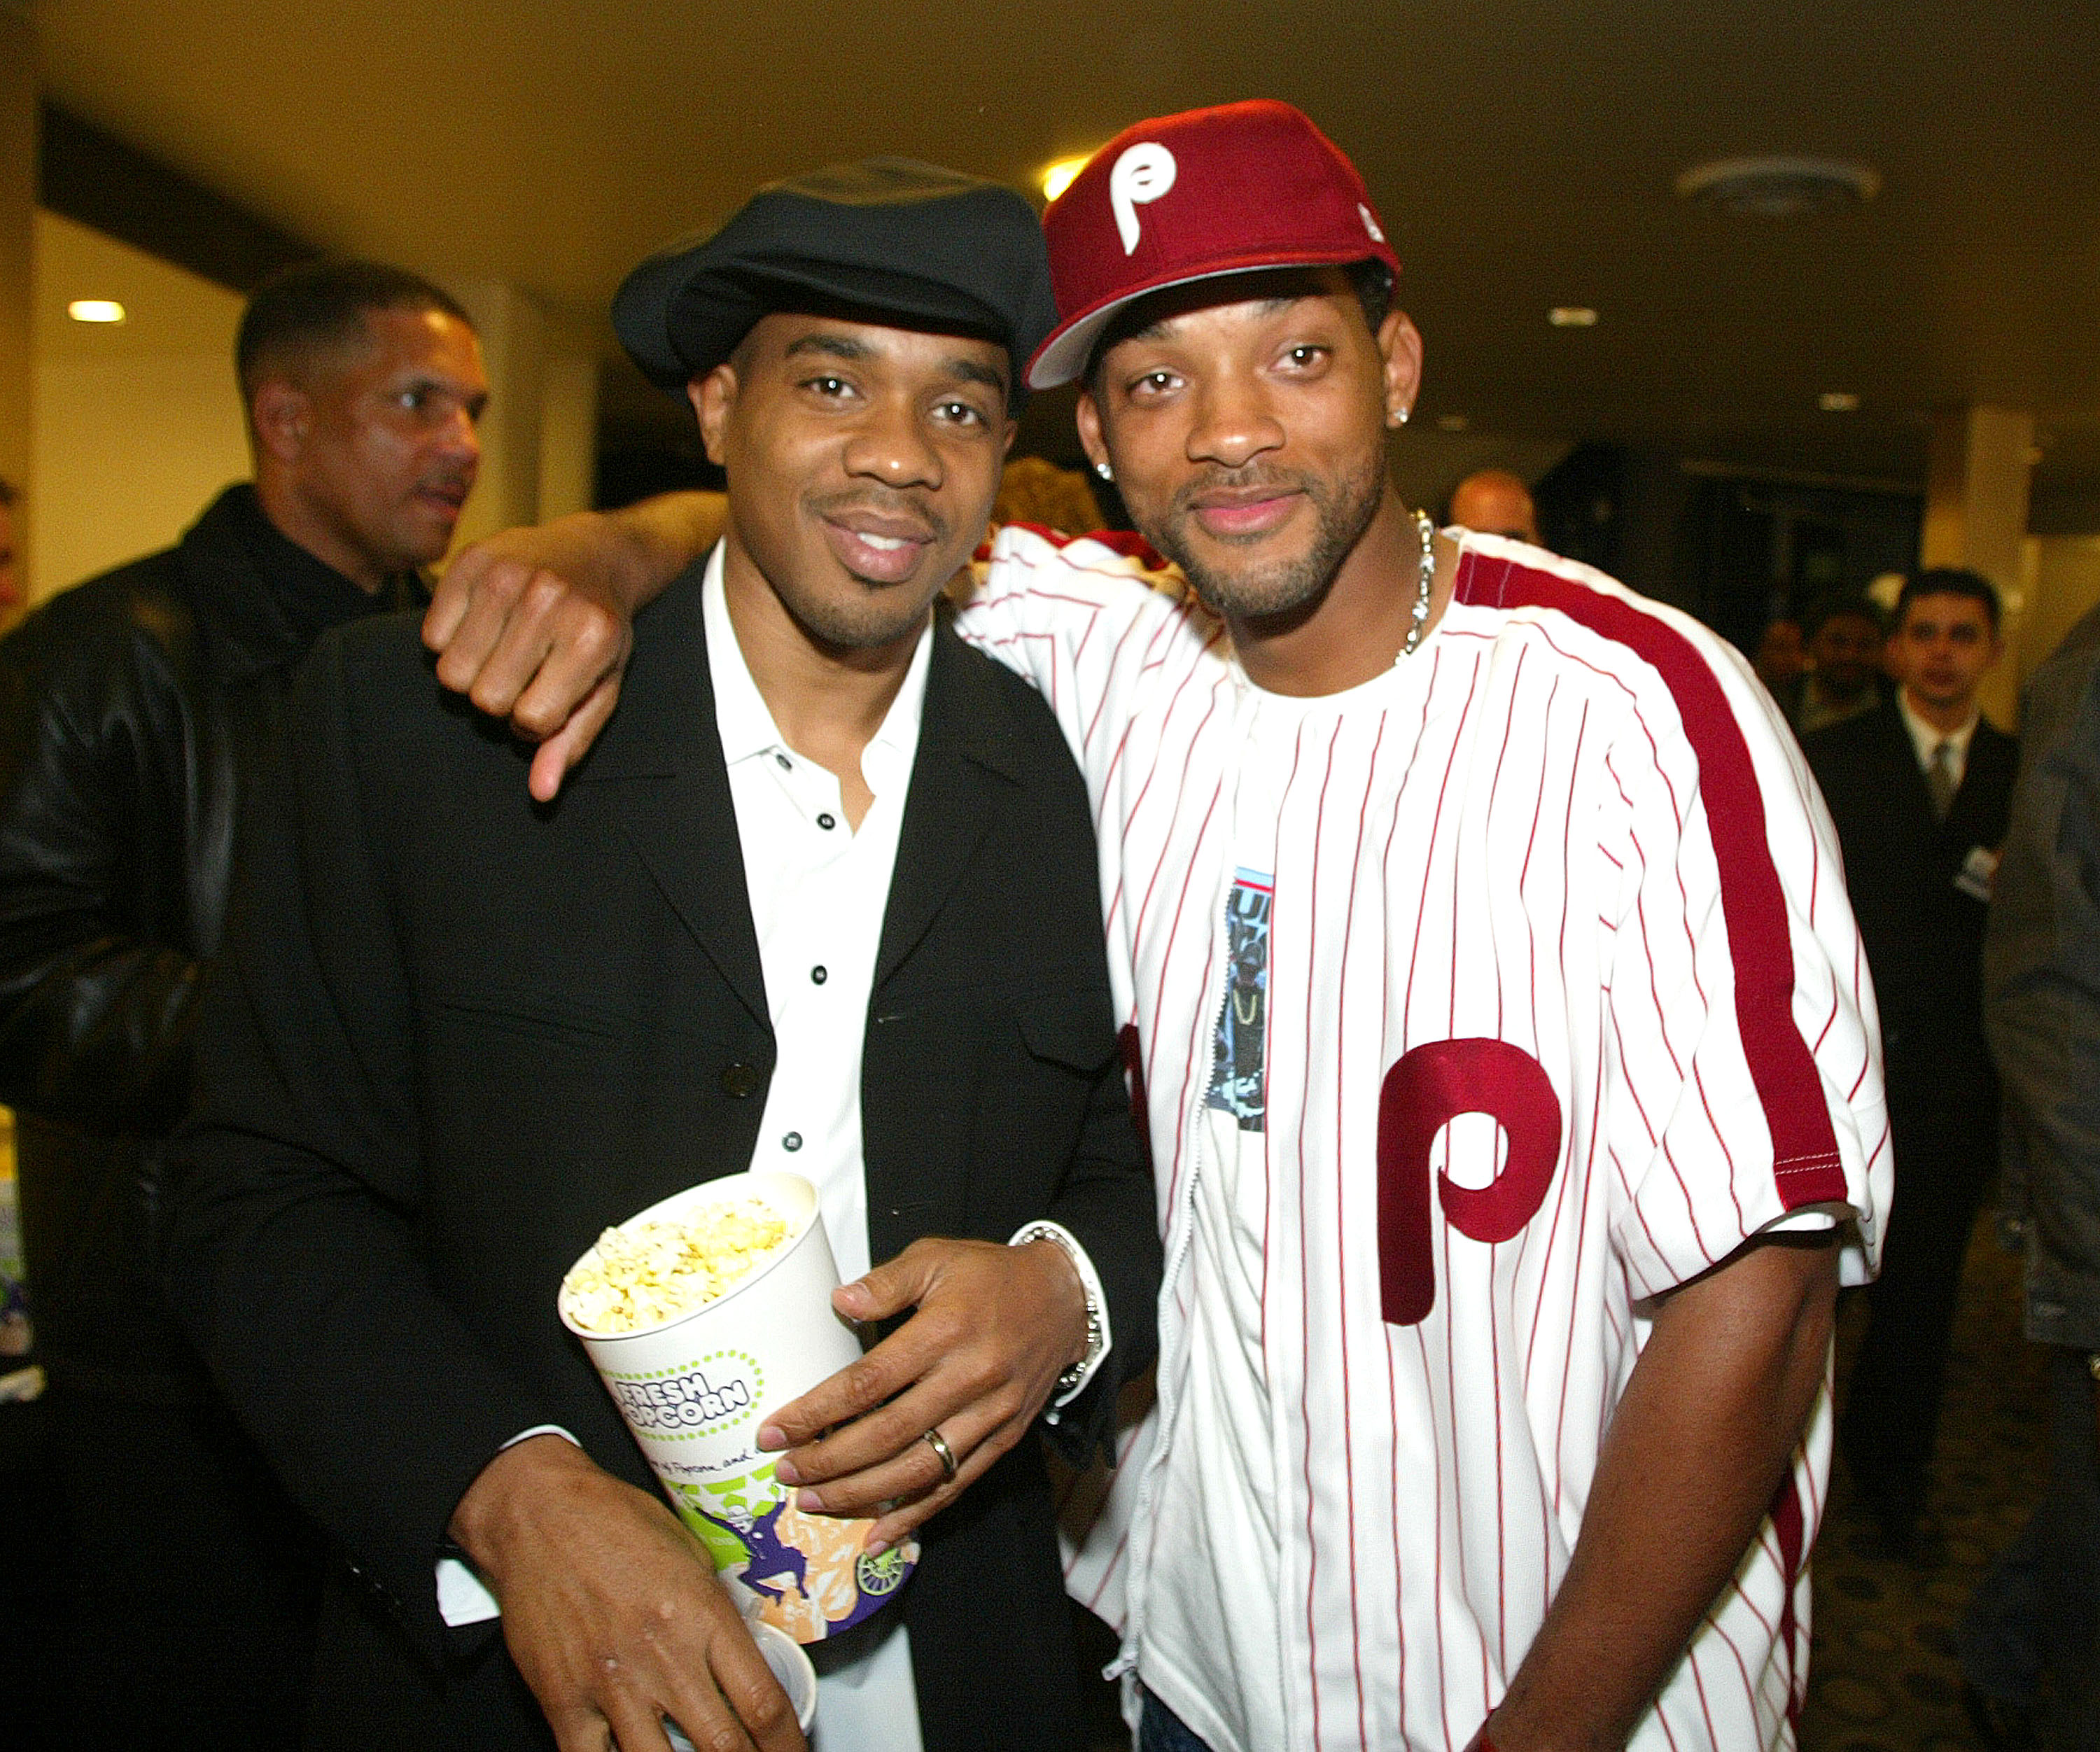 Duane Martin and Will Smith during the premiere of "Deliver Us From Eva" at the Cinerama Dome on January 29, 2003, in Hollywood, California. | Source: Getty Images